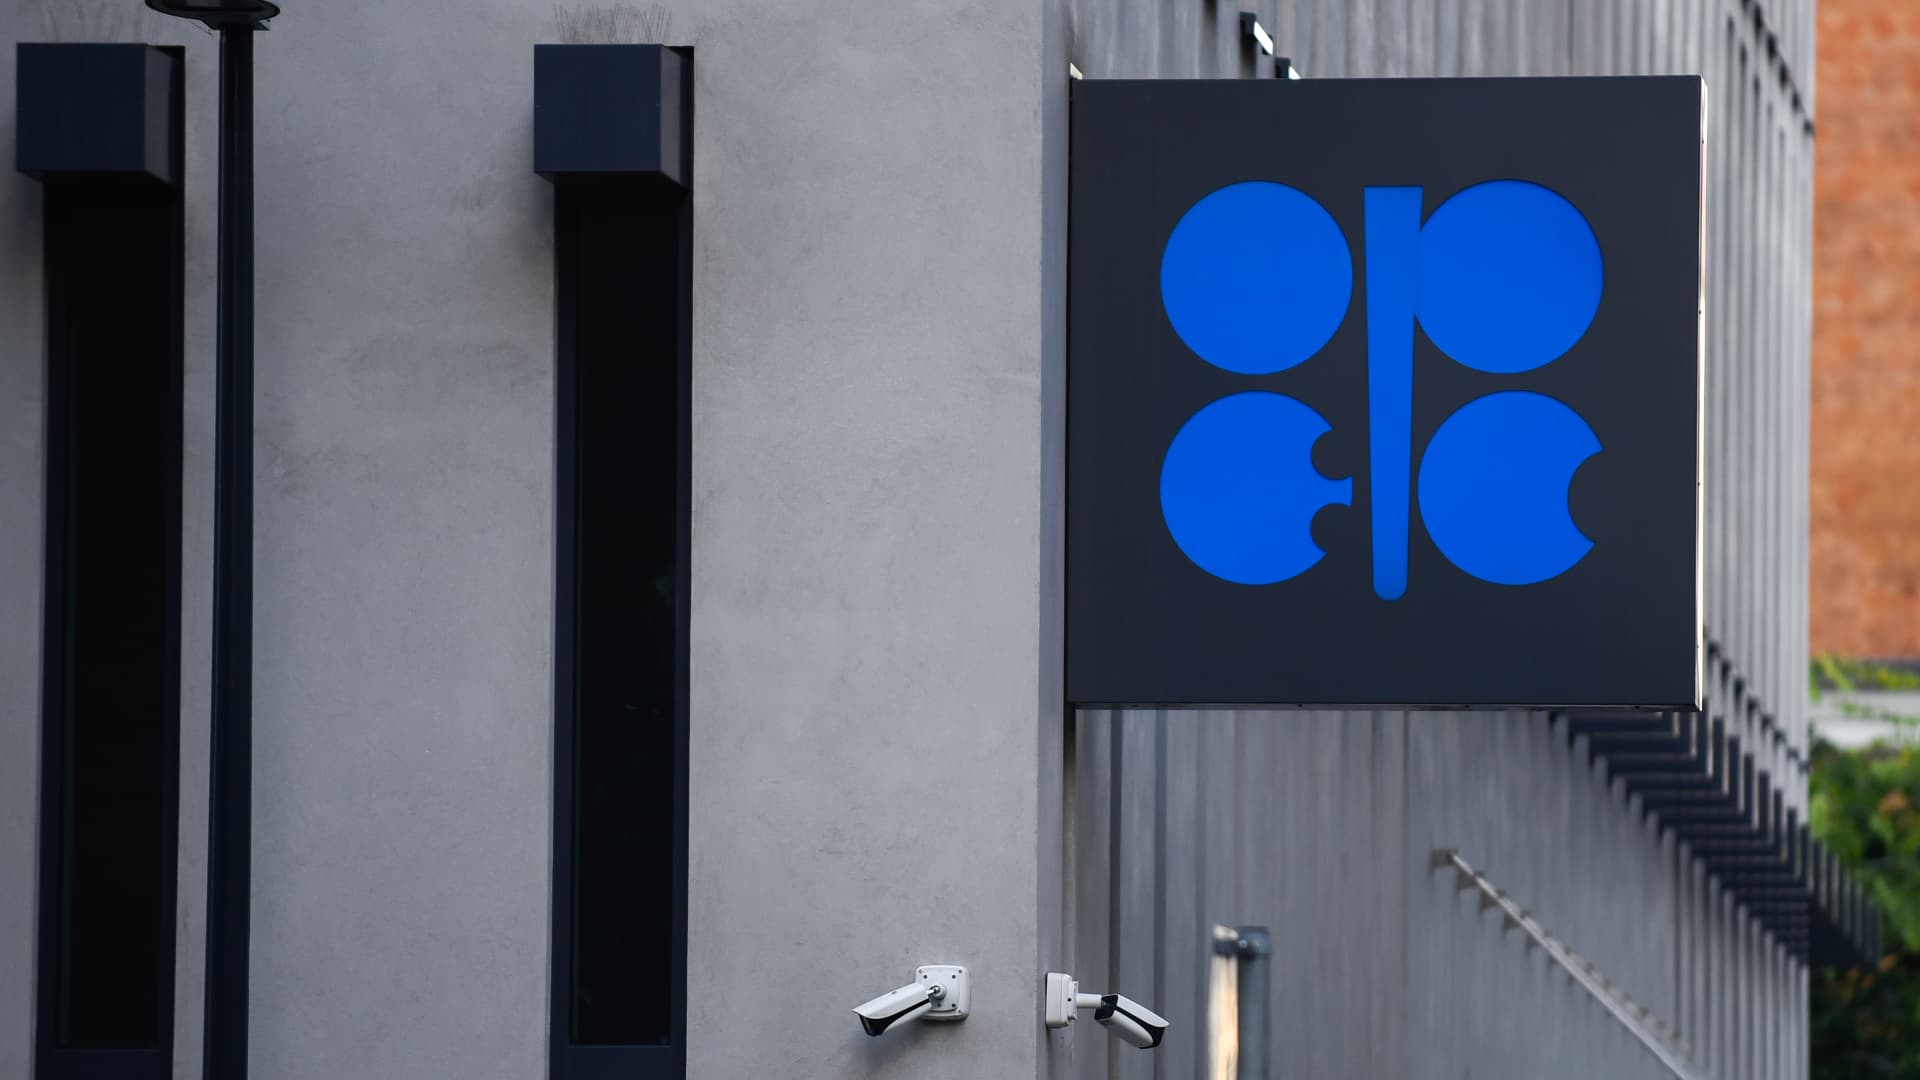 OPEC+ to consider oil cut of over than 1 million barrels per day